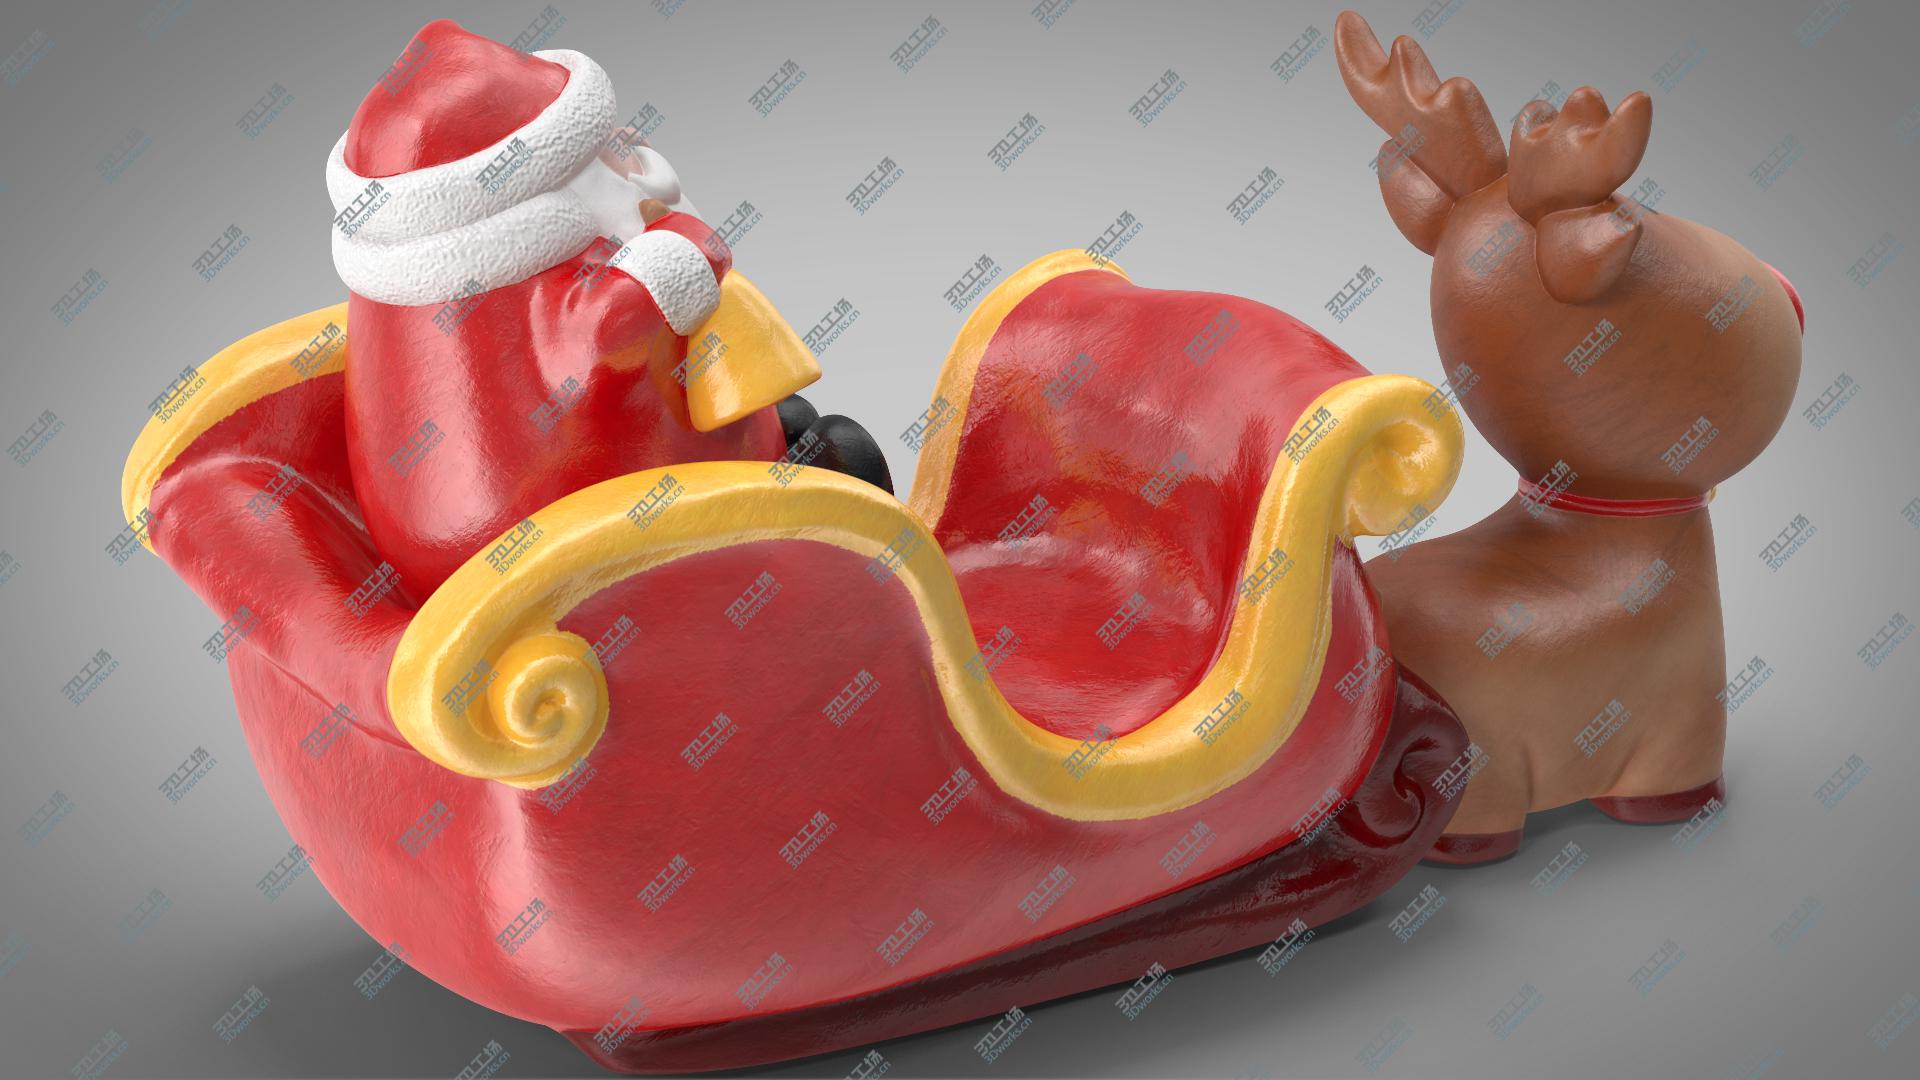 images/goods_img/202105071/3D Santa Claus with Sleigh Decorative Figurine model/4.jpg